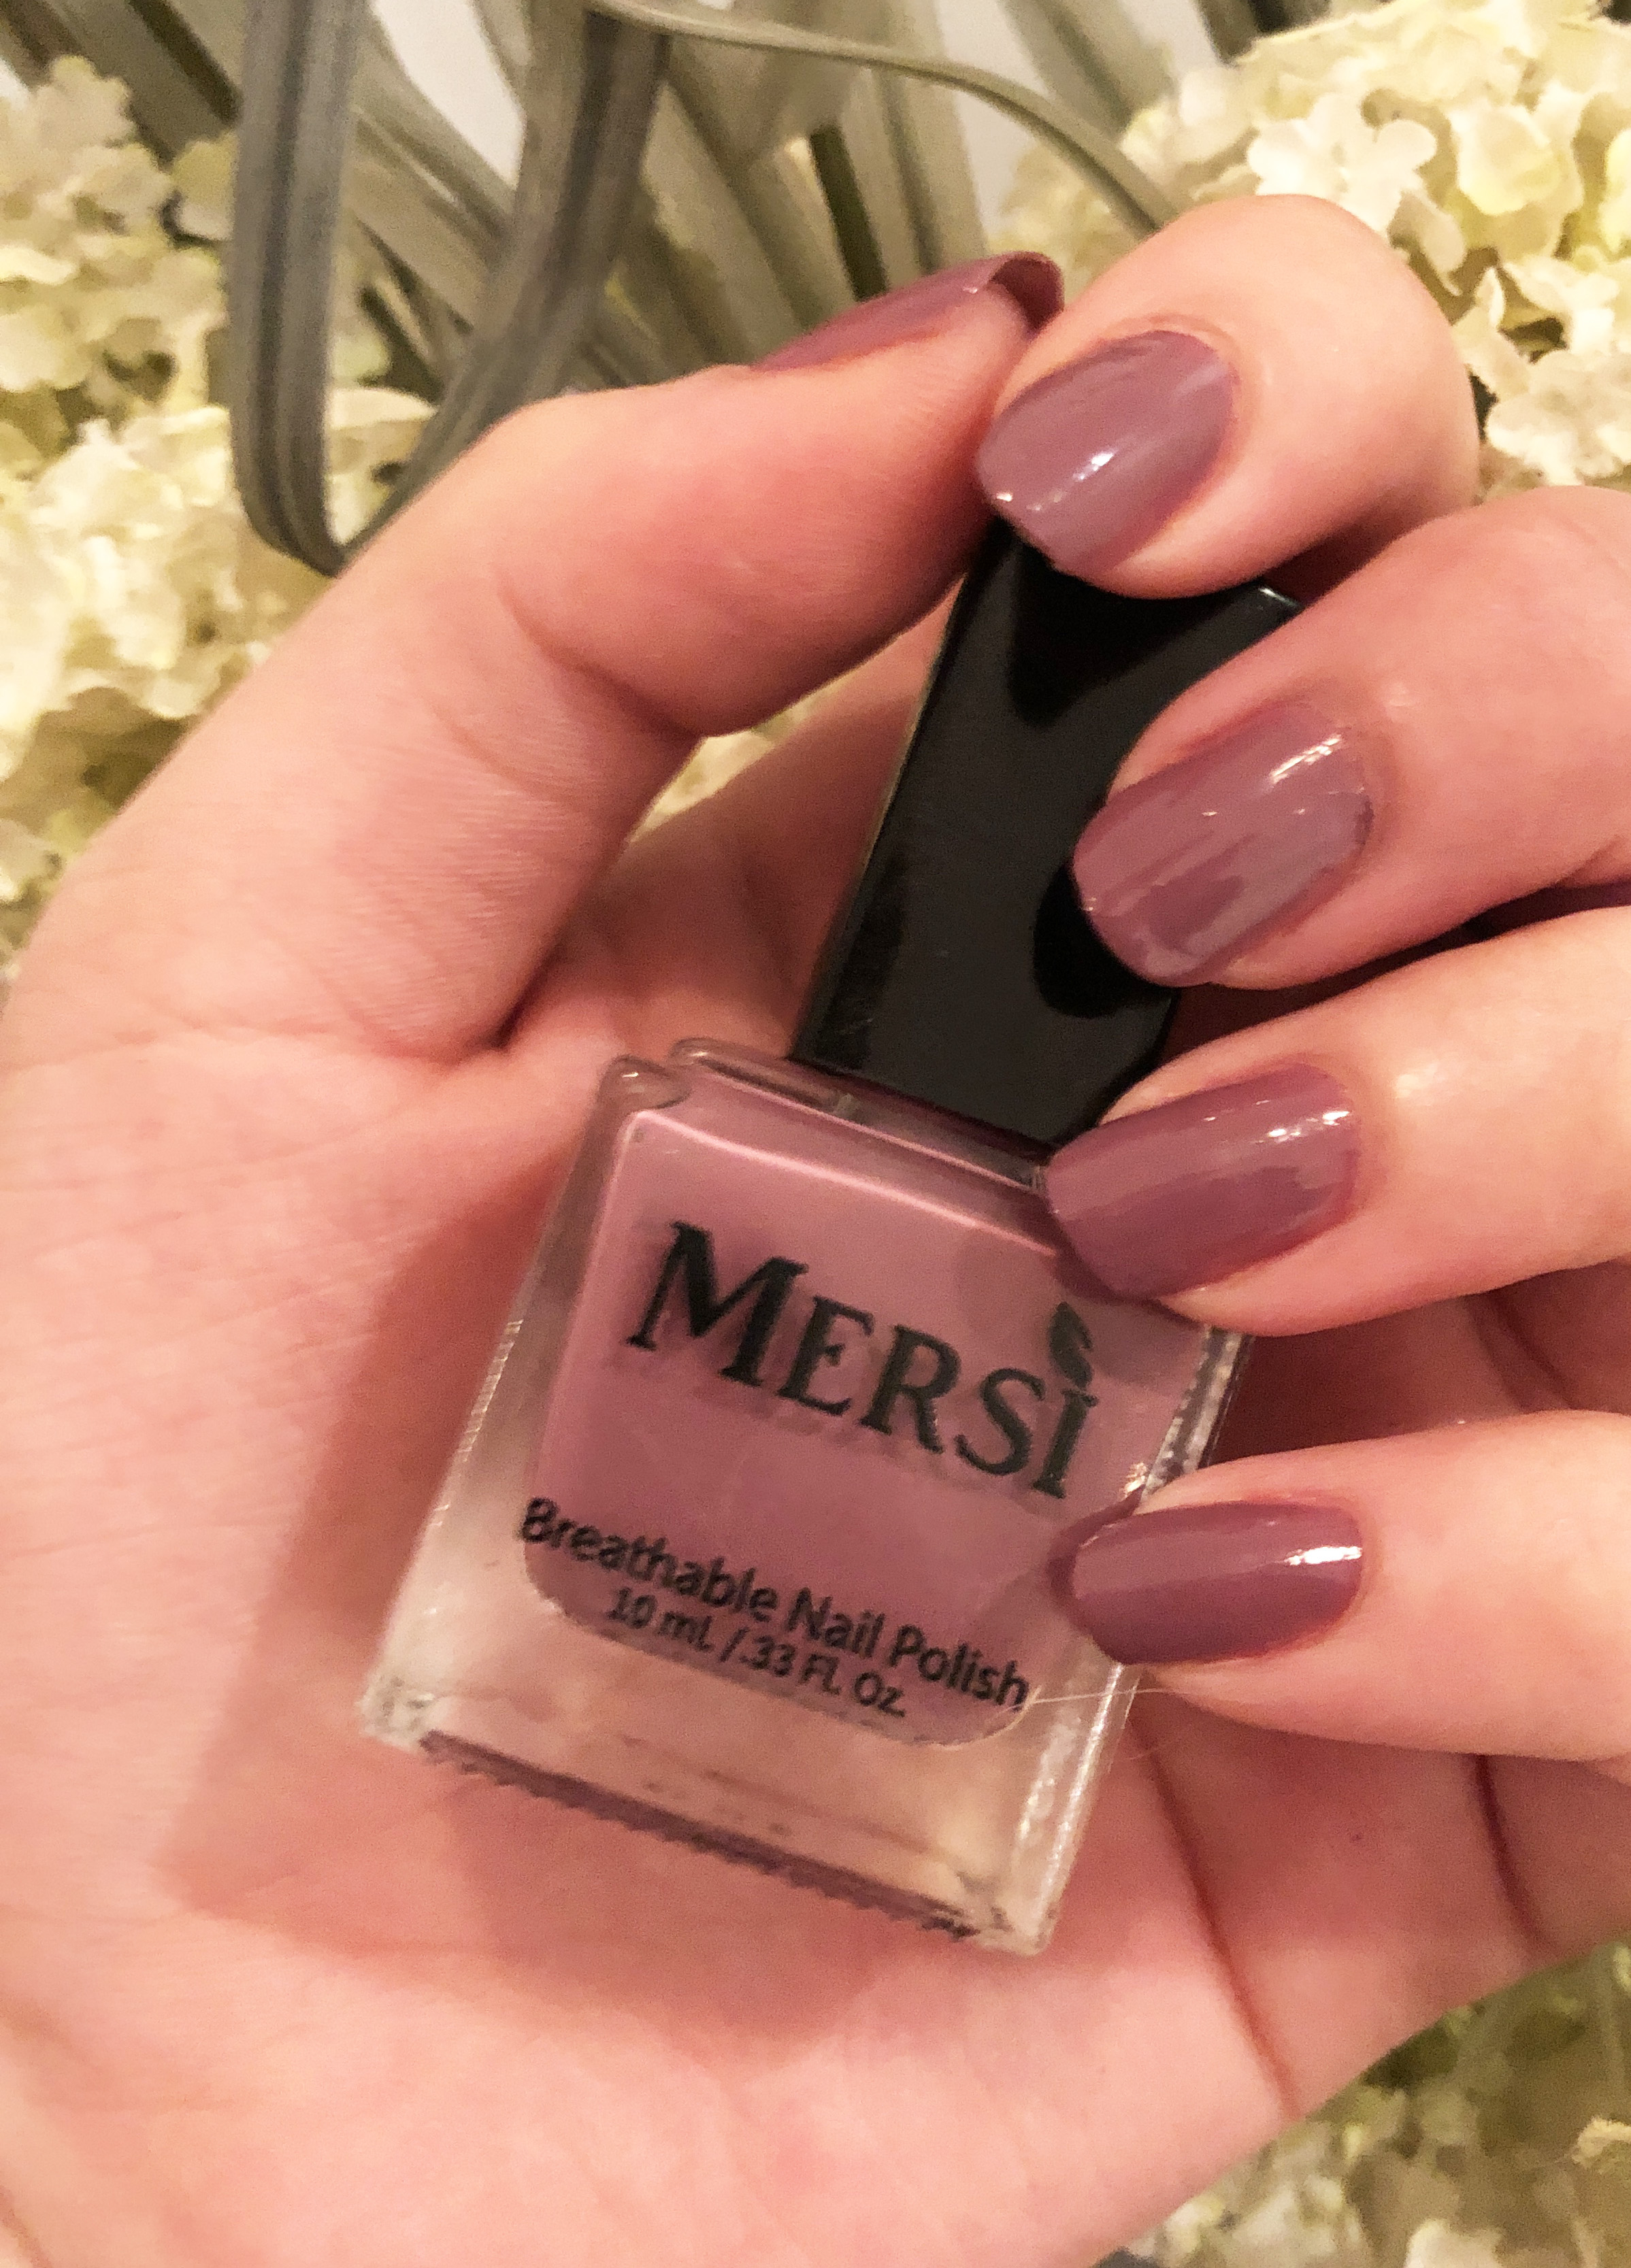 Mersi Cosmetics Launches Their Line of Halal Nail Polish | Newswire